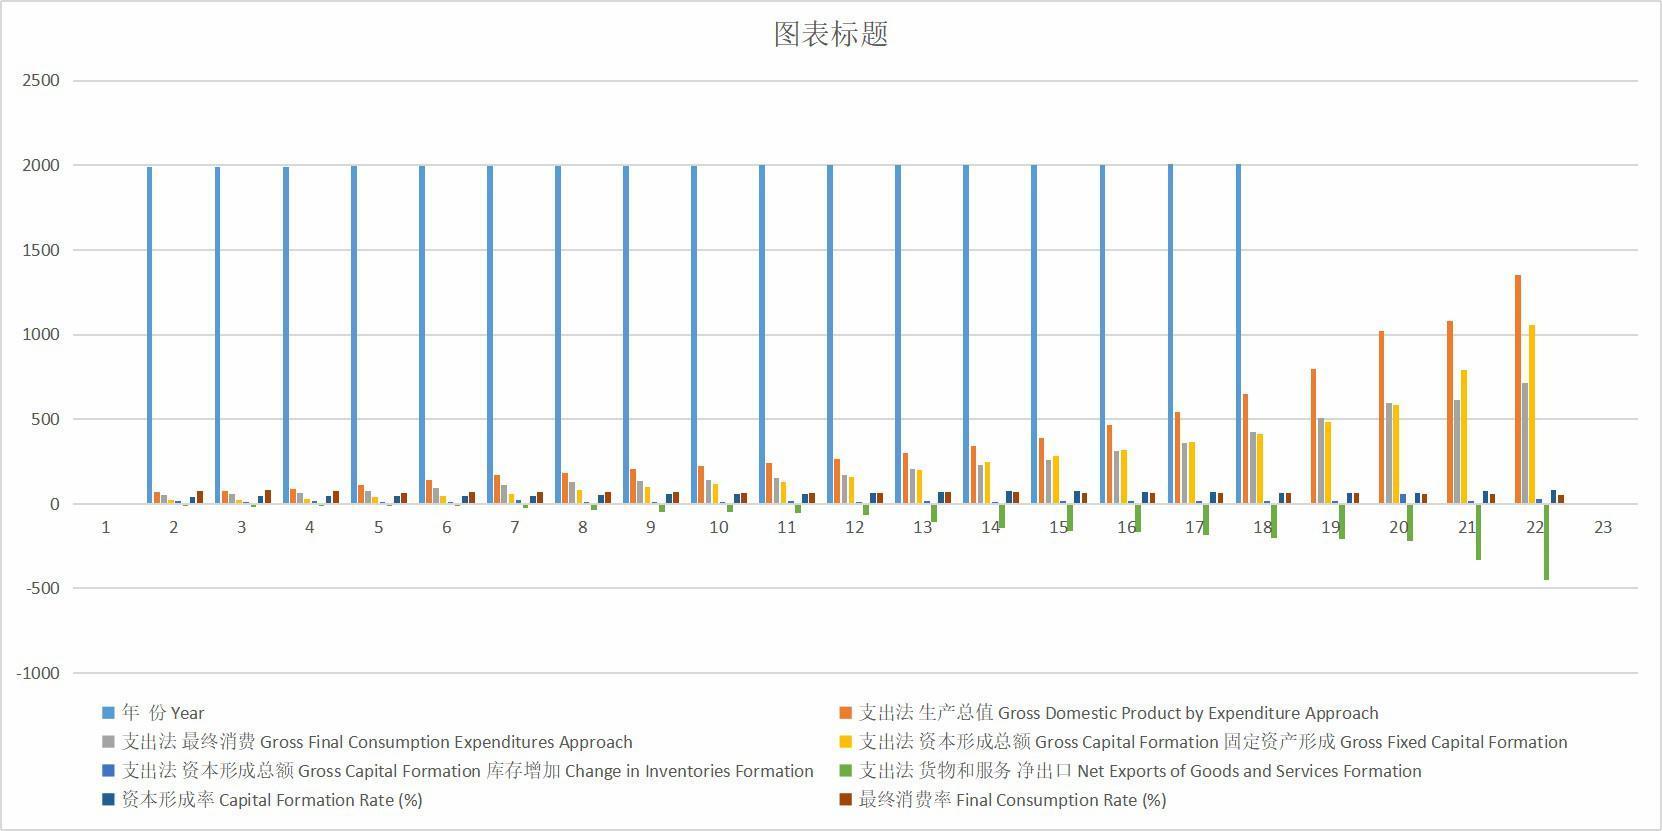 GDP of Qinghai Province by expenditure method (1990-2019)